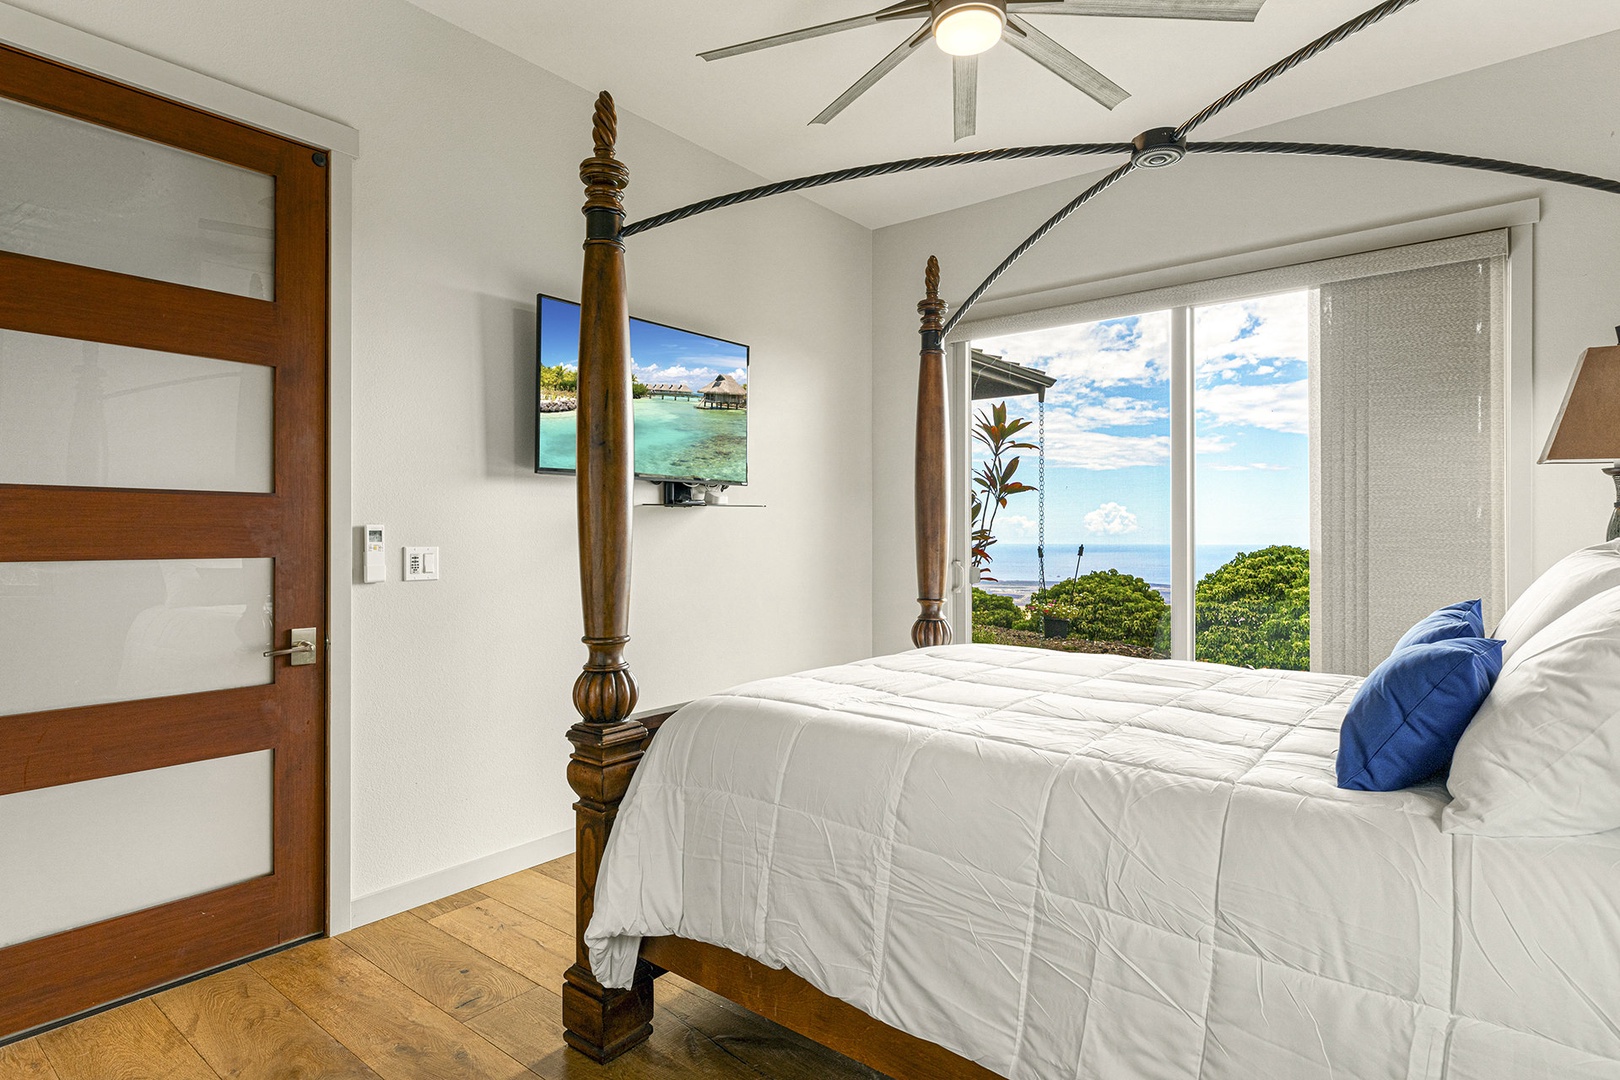 Bedroom 2 with King bed, TV, ocean view, and ensuite